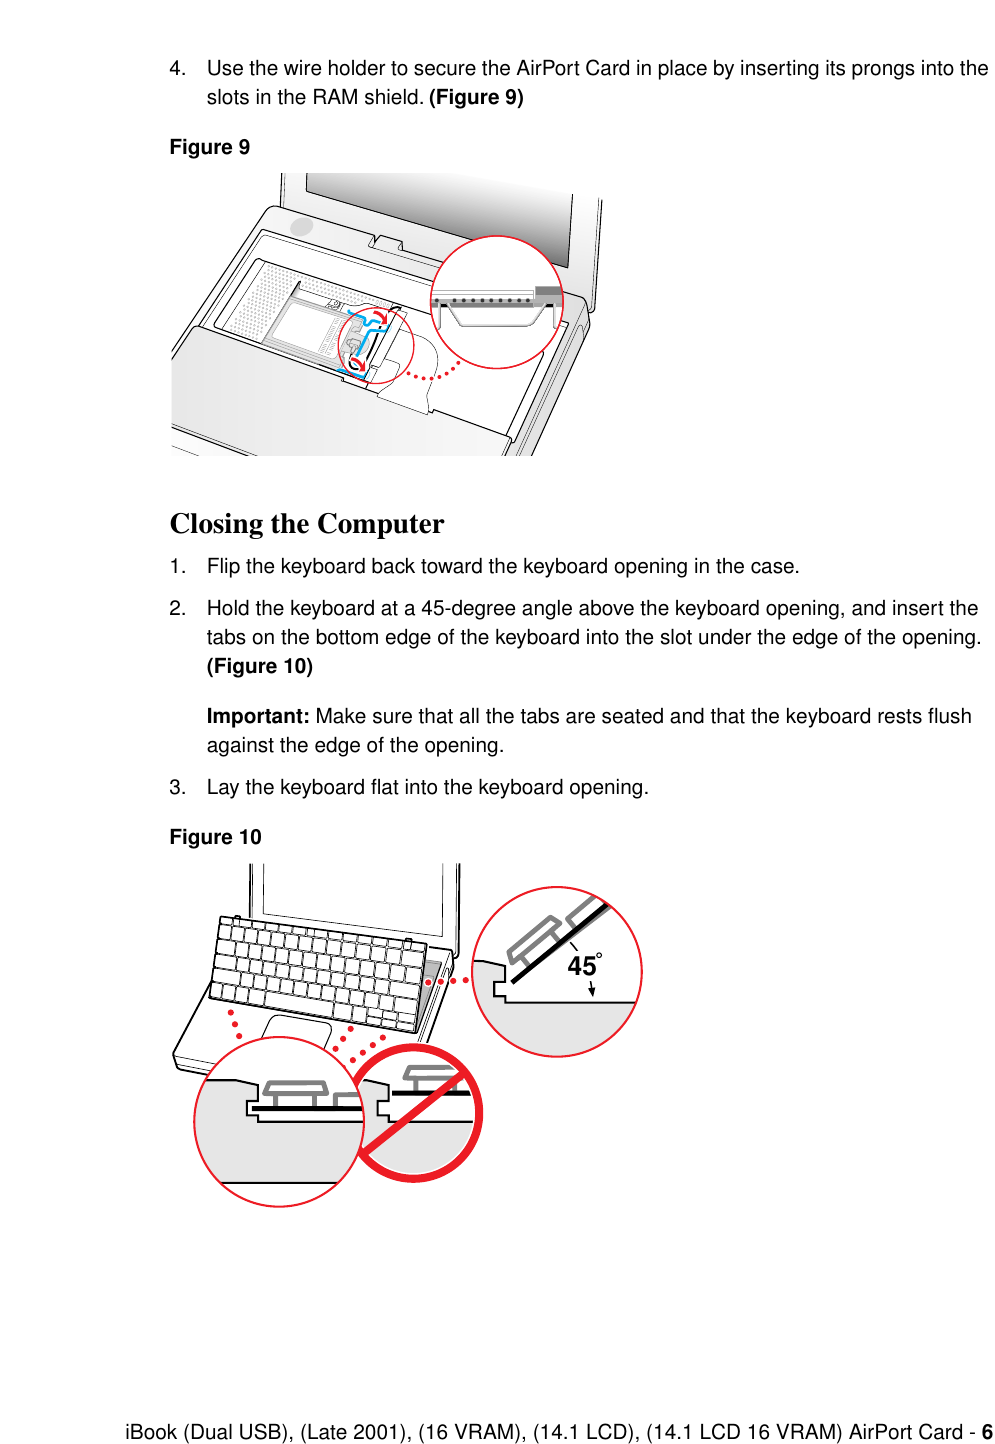  iBook (Dual USB), (Late 2001), (16 VRAM), (14.1 LCD), (14.1 LCD 16 VRAM) AirPort Card -  6 4. Use the wire holder to secure the AirPort Card in place by inserting its prongs into the slots in the RAM shield.  (Figure 9)Figure 9 Closing the Computer 1. Flip the keyboard back toward the keyboard opening in the case.2. Hold the keyboard at a 45-degree angle above the keyboard opening, and insert the tabs on the bottom edge of the keyboard into the slot under the edge of the opening.  (Figure 10)Important:  Make sure that all the tabs are seated and that the keyboard rests flush against the edge of the opening.3. Lay the keyboard ﬂat into the keyboard opening. Figure 1045